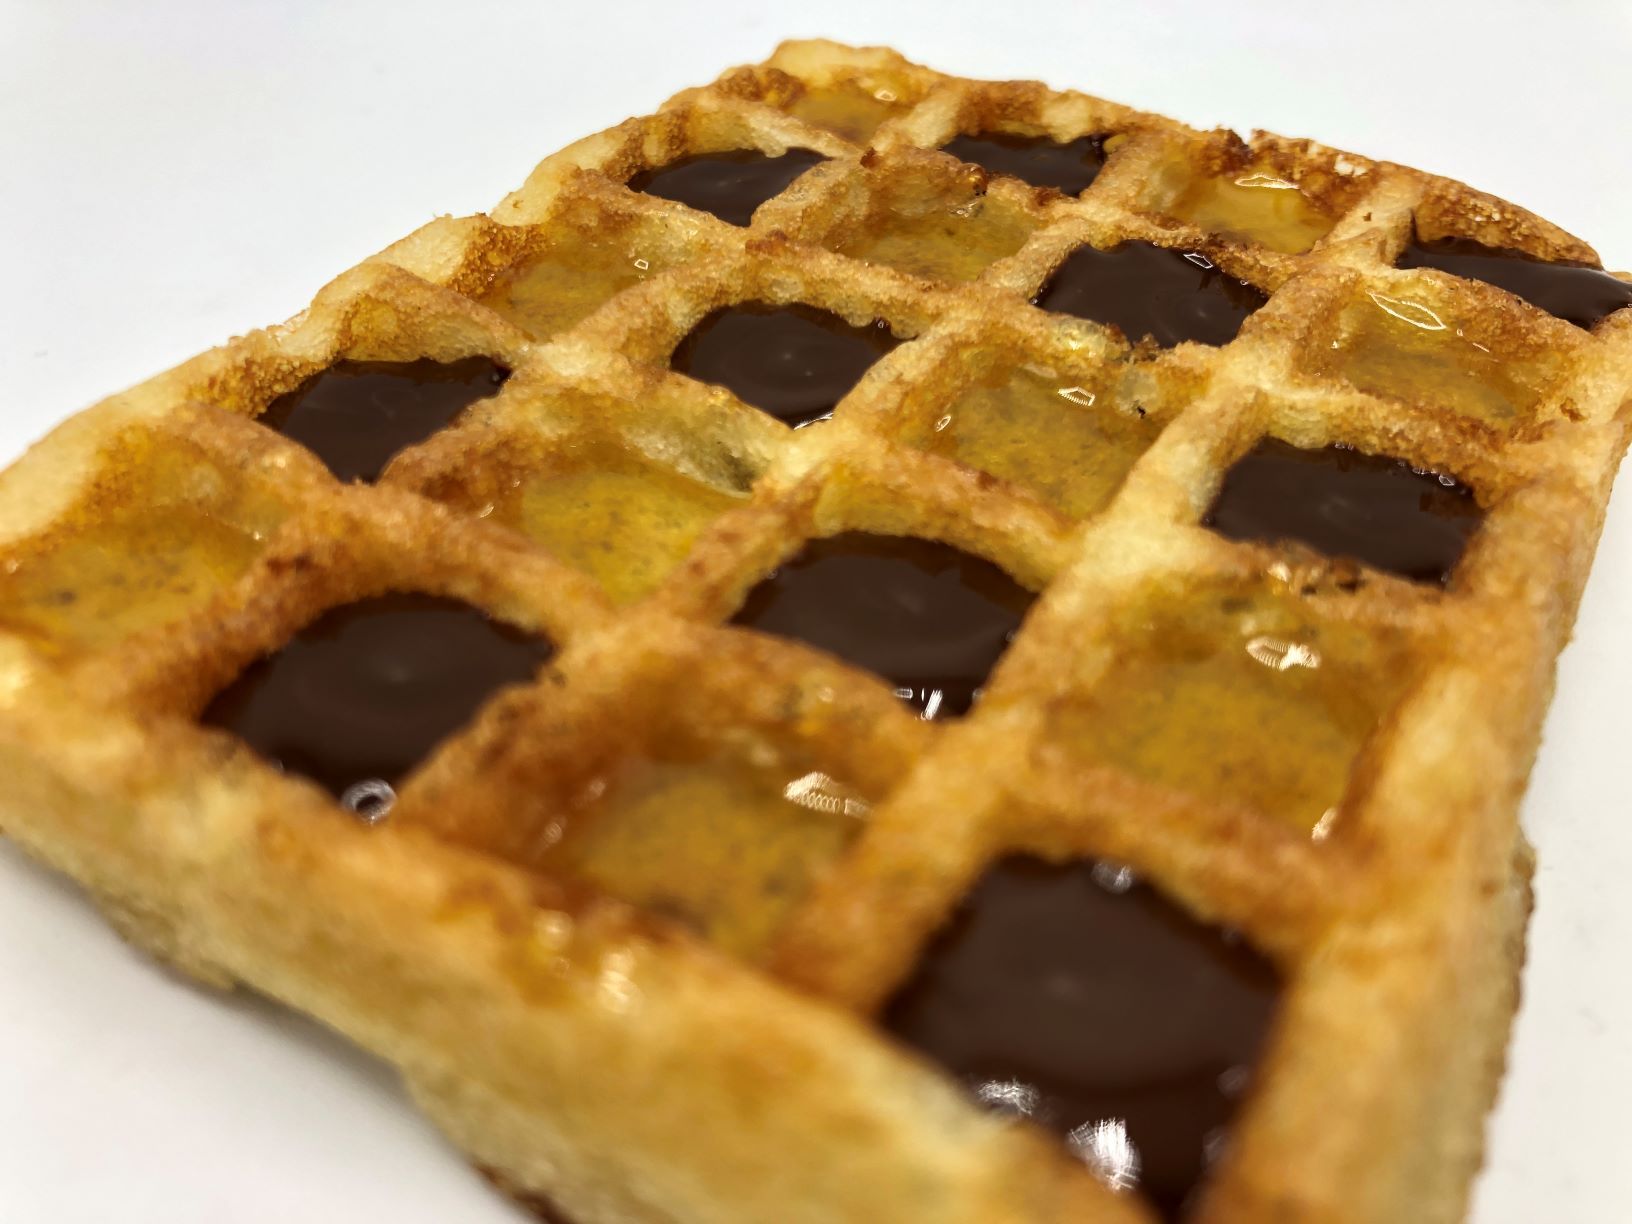 Egg waffle filled with marmalade and chocolade by FoodJet chocolate depositor